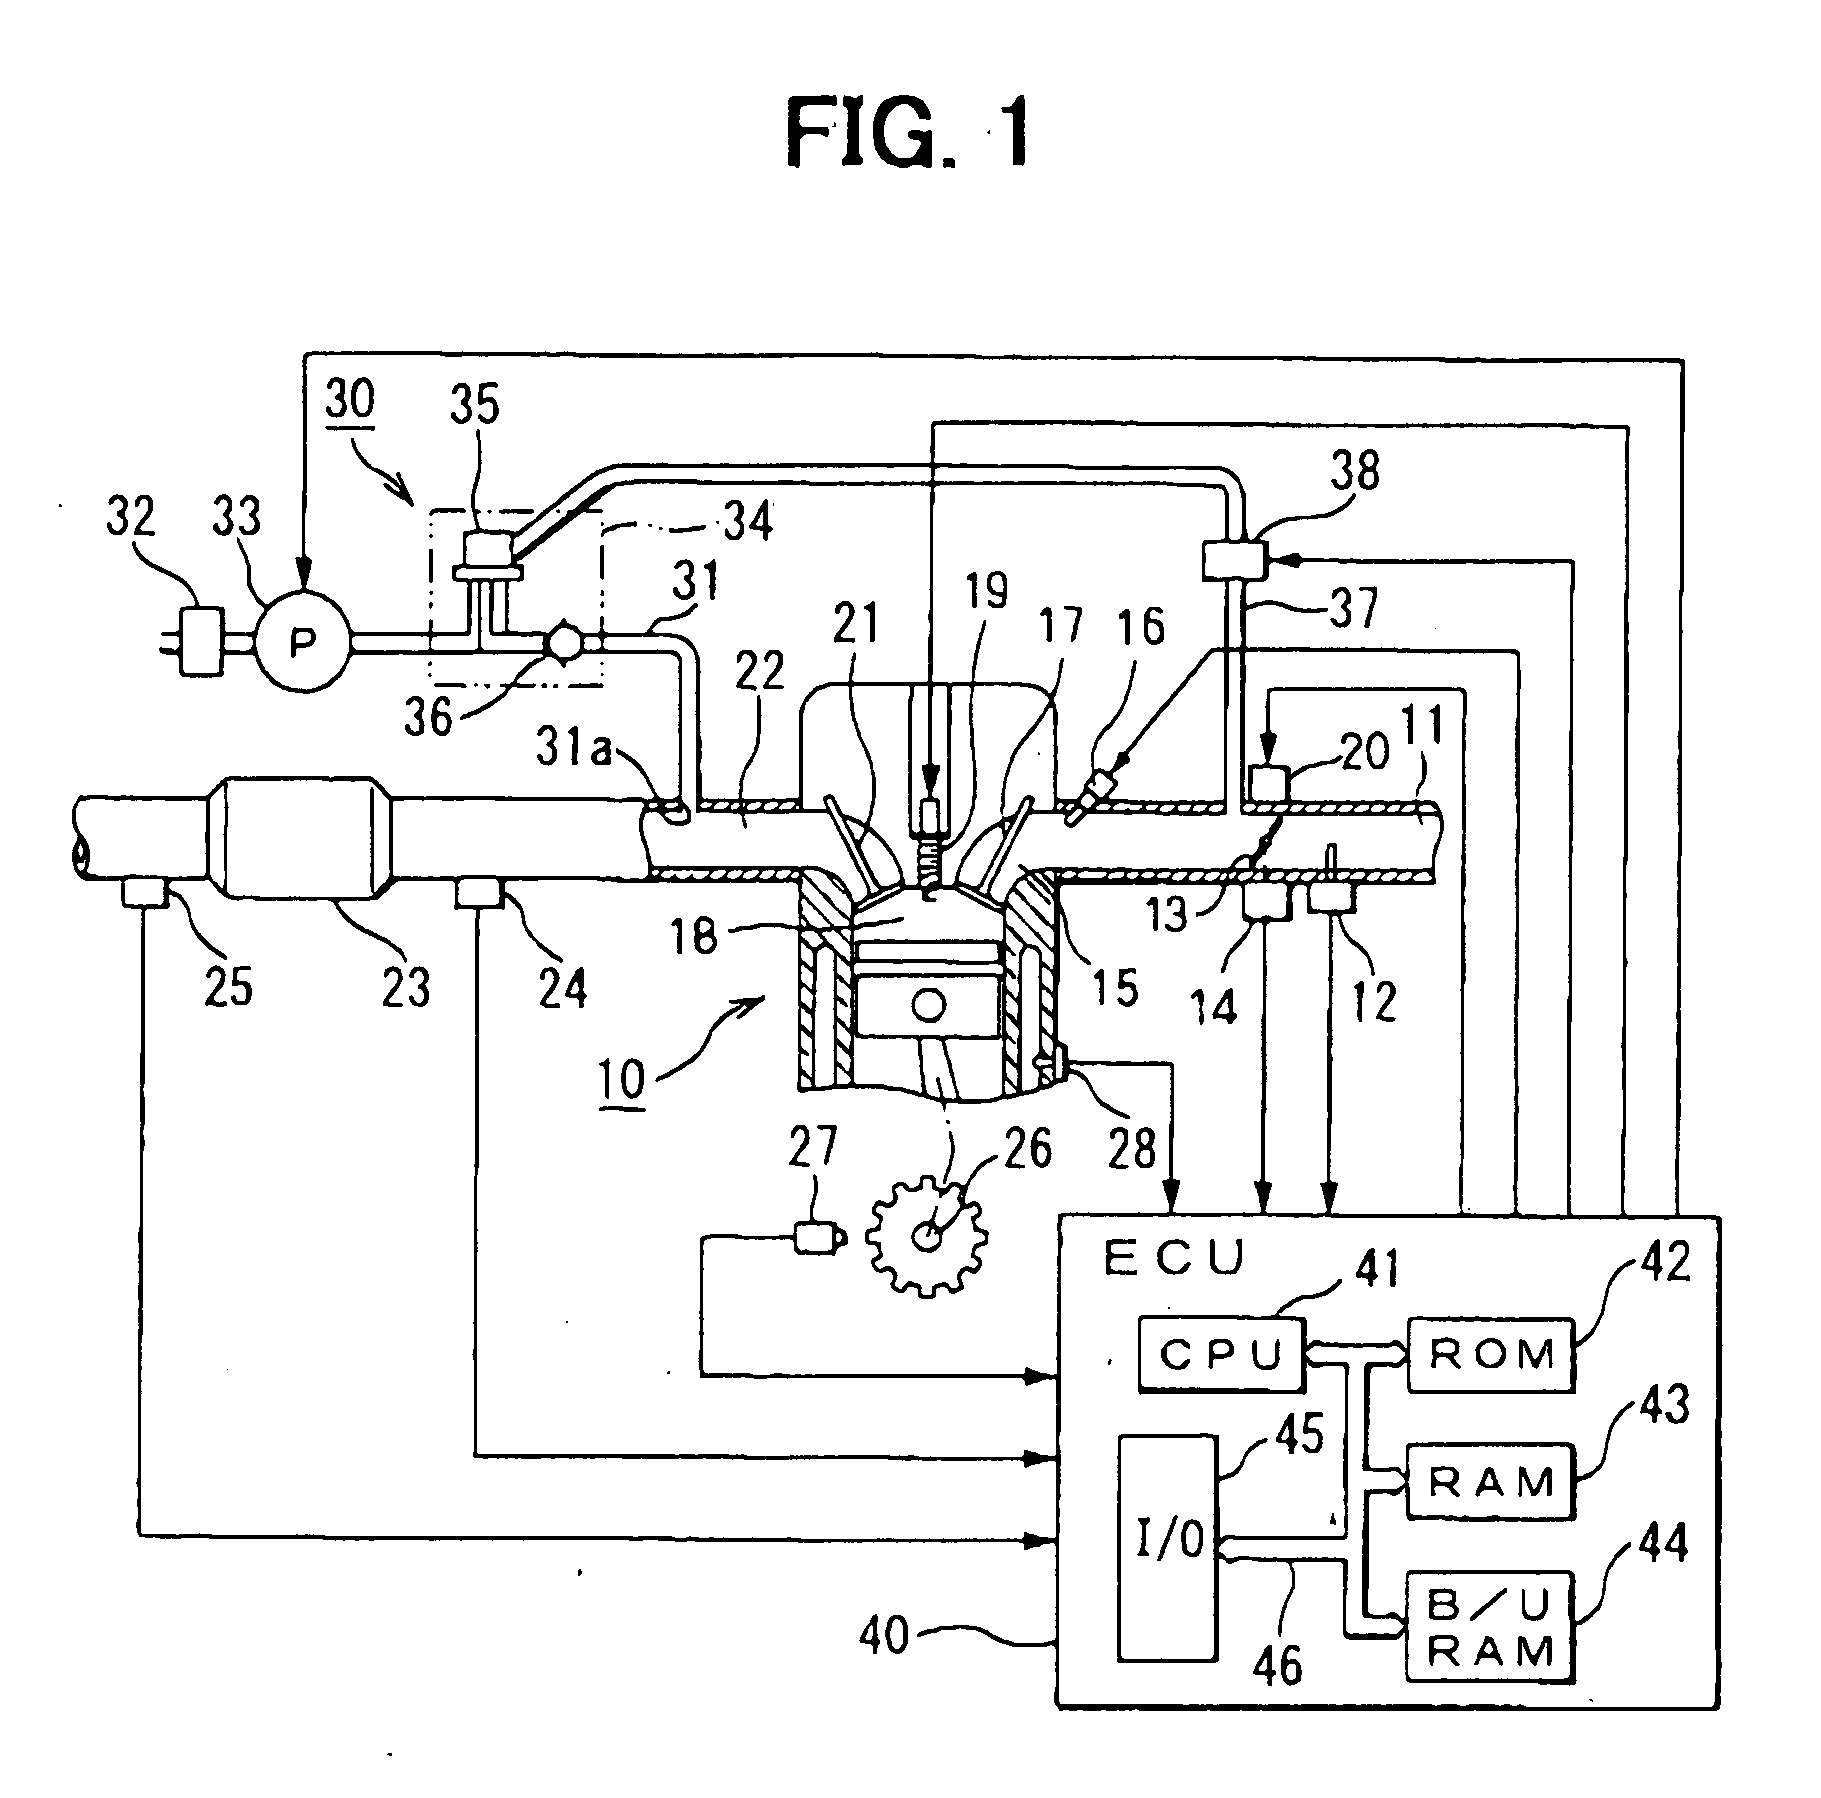 Secondary air supply abnormality detection system